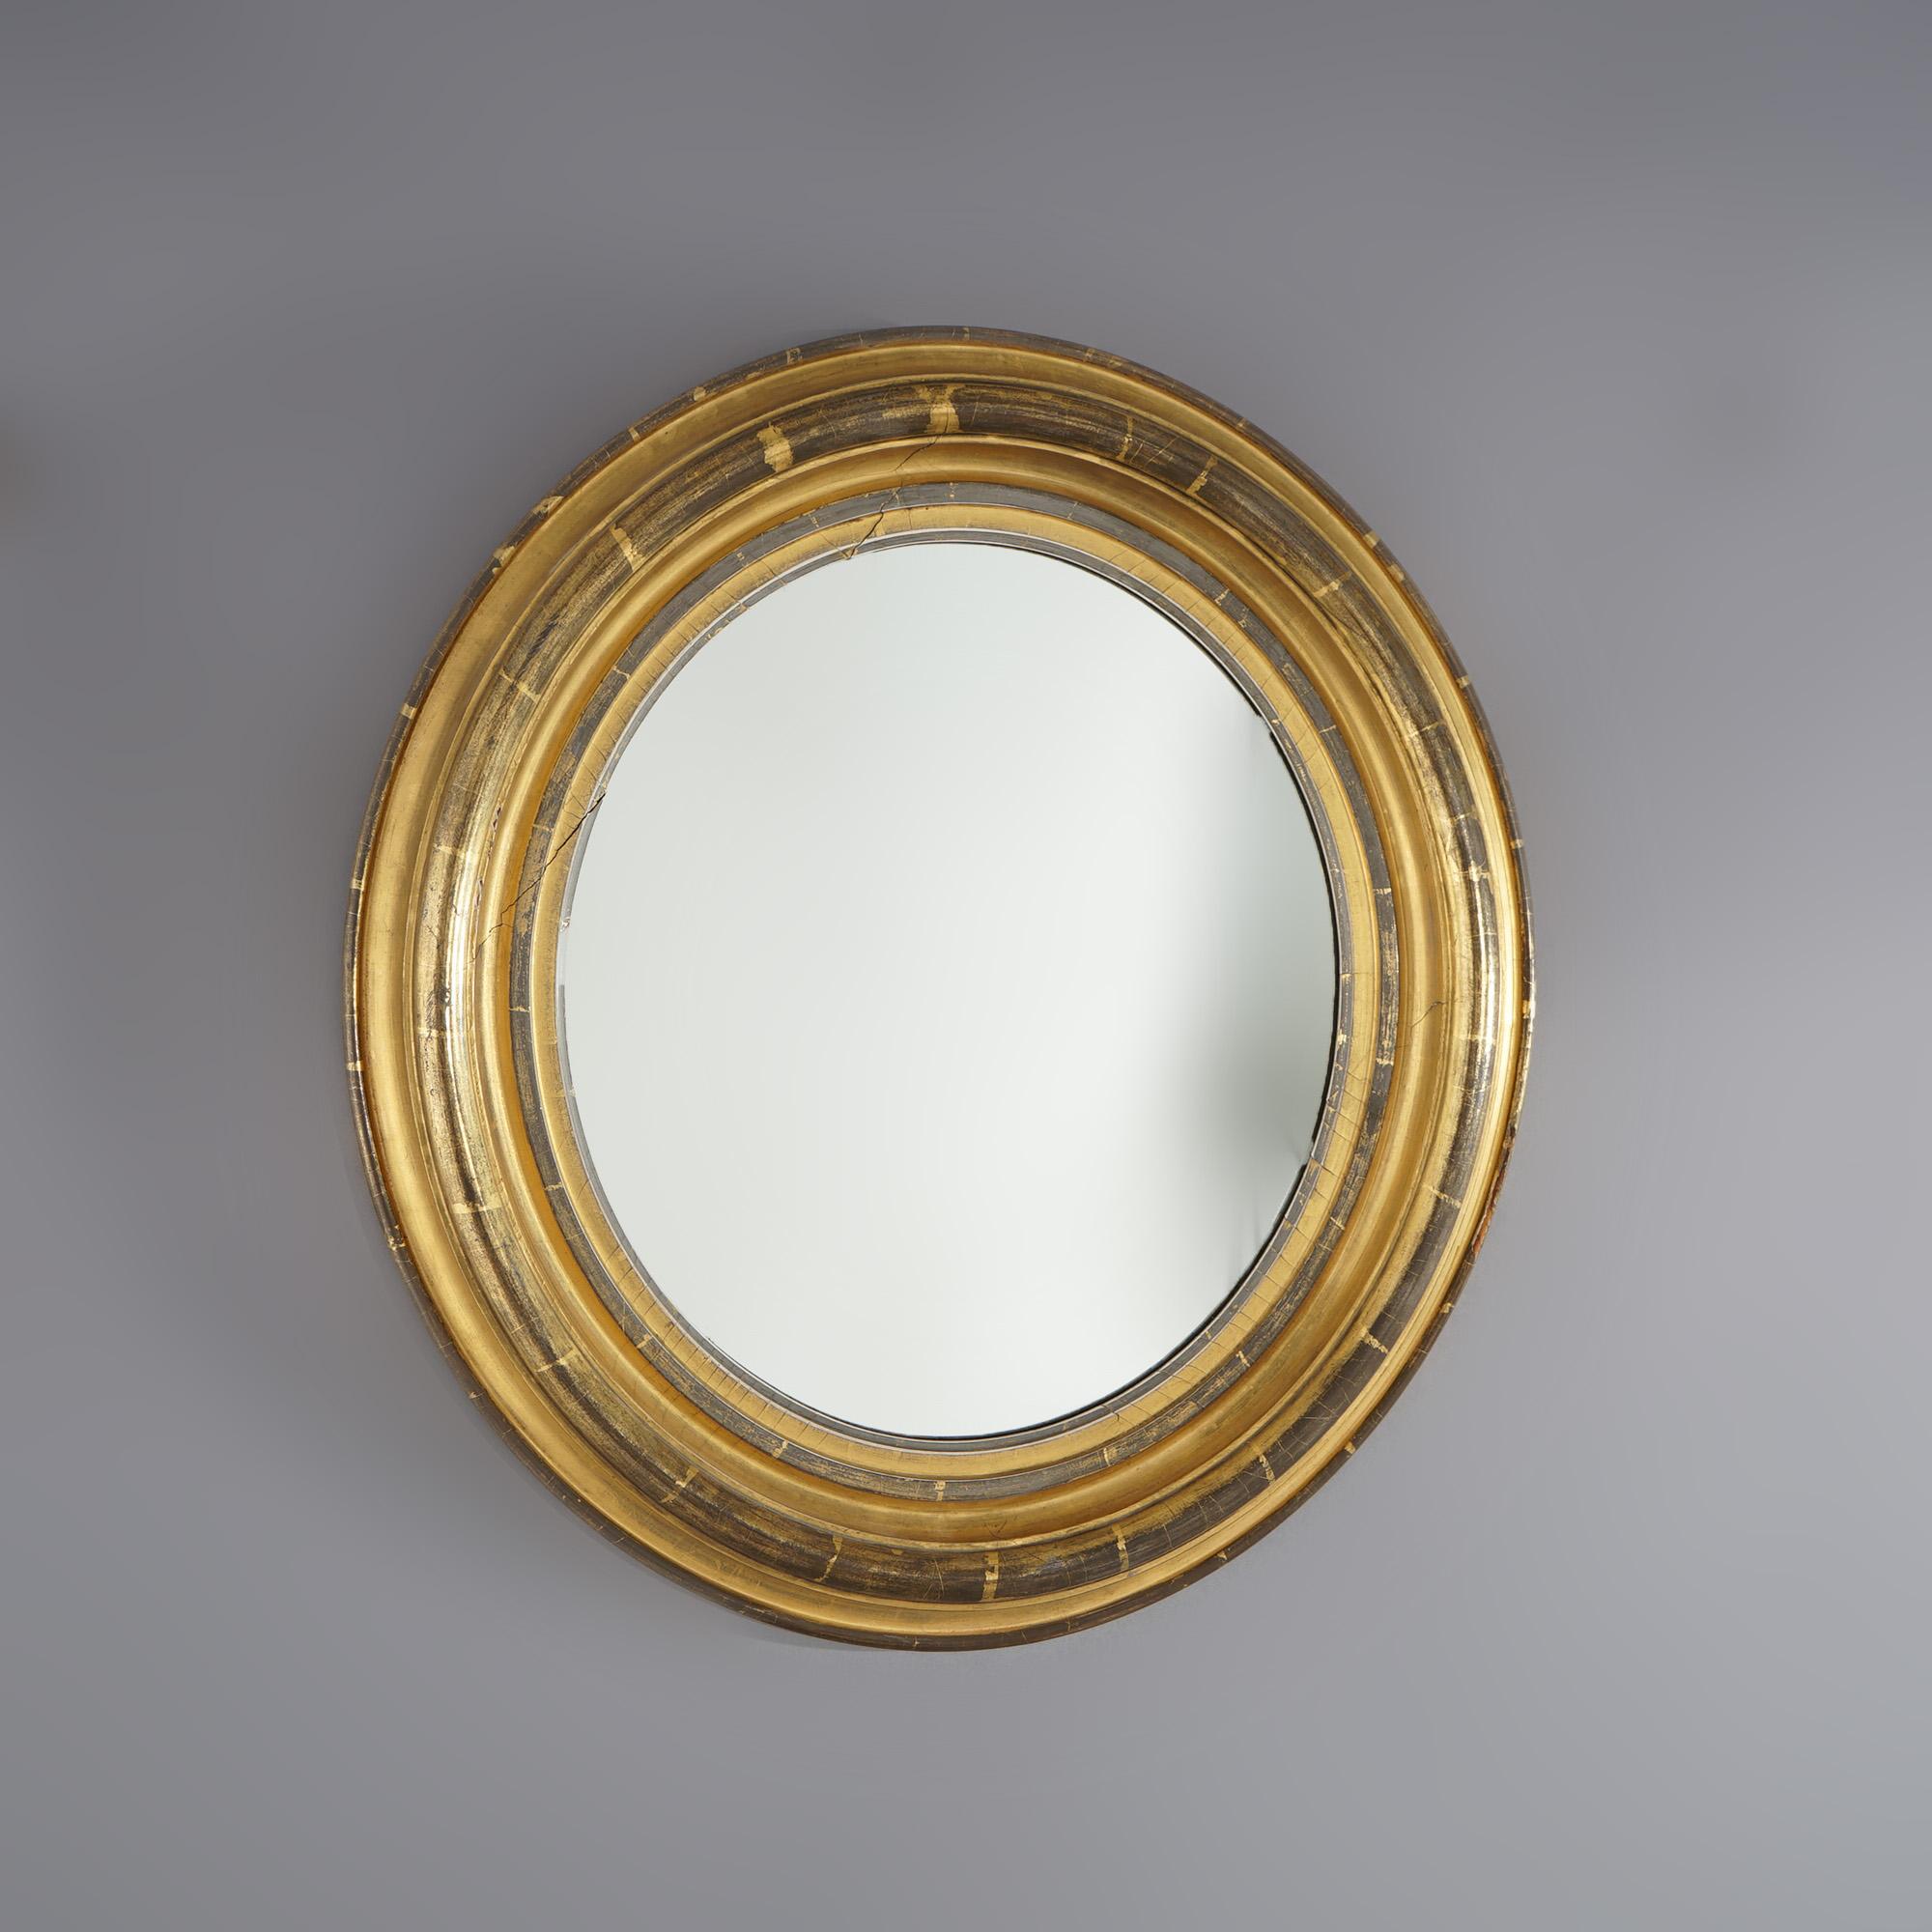 Antique American Empire First Finish Giltwood Framed Oval Wall Mirror Circa 1840 In Good Condition For Sale In Big Flats, NY